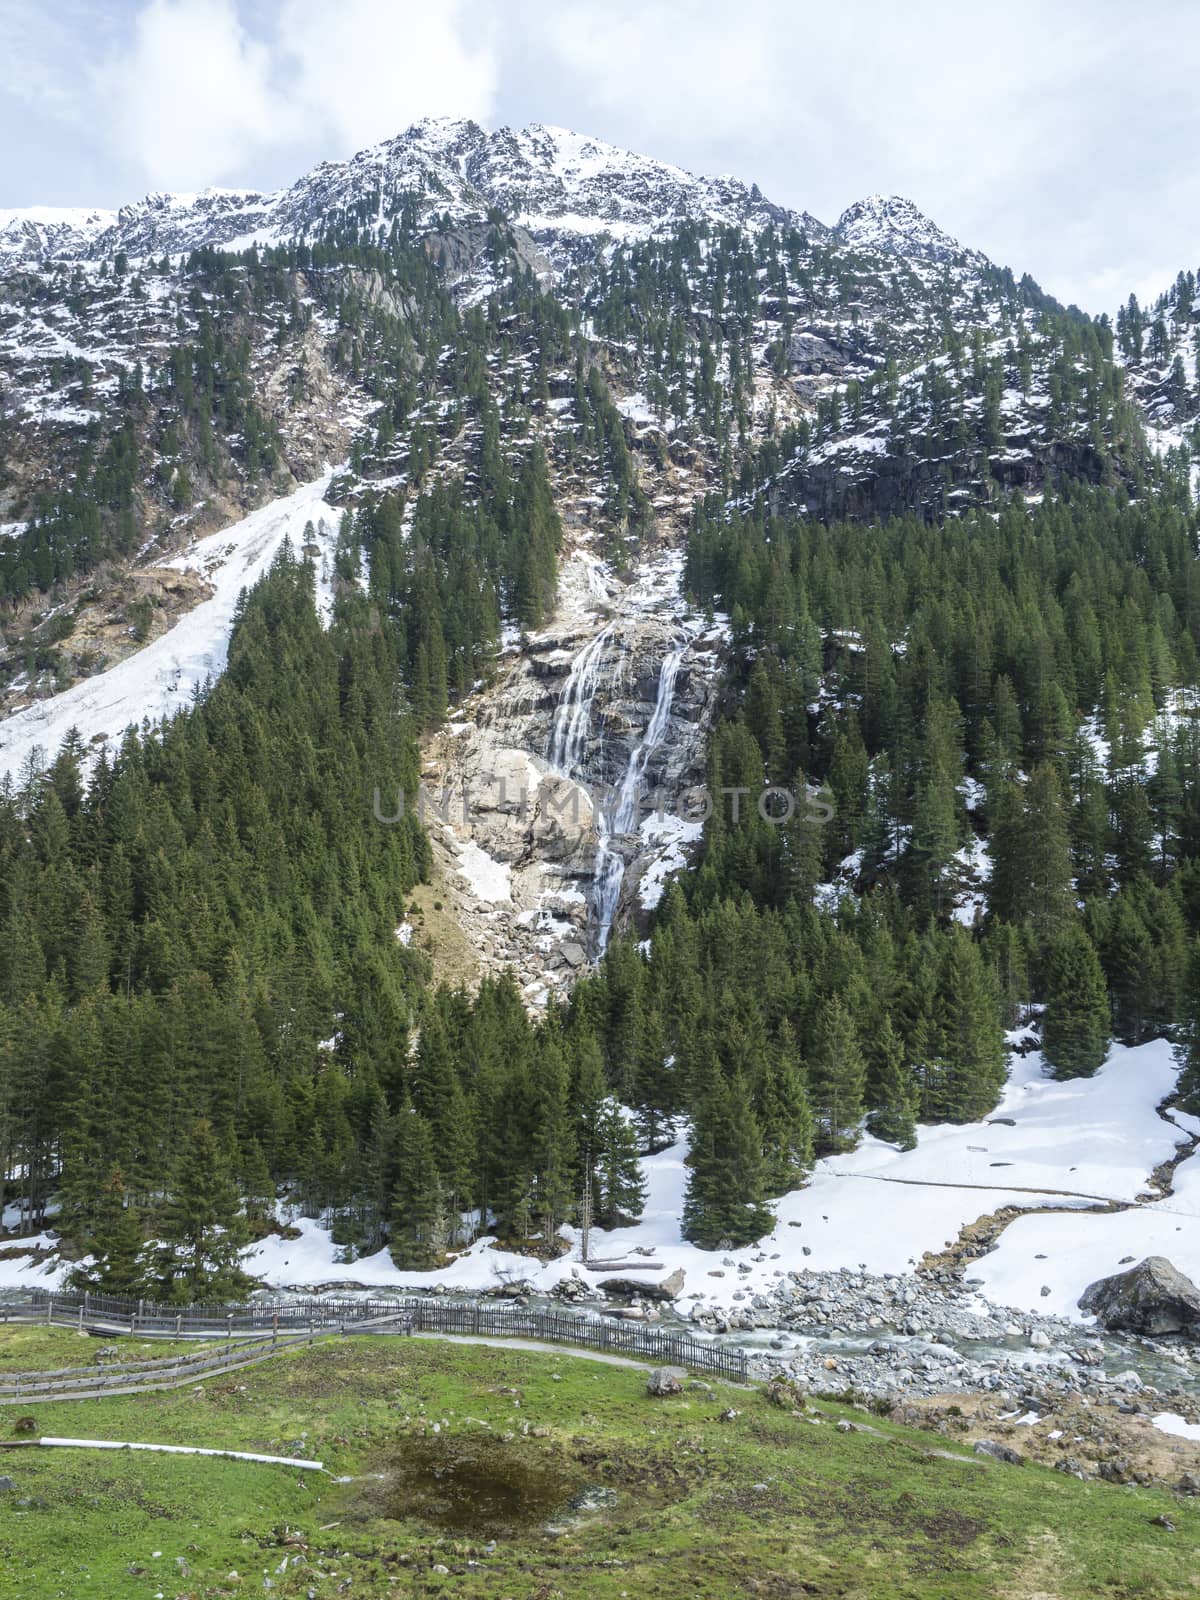 GRAWA Wasserfall Glacier Waterfall situated in Stubai Valley, Tyrol, Austria. Spring mountain river and trees landscape natural environment. Hiking in the alps